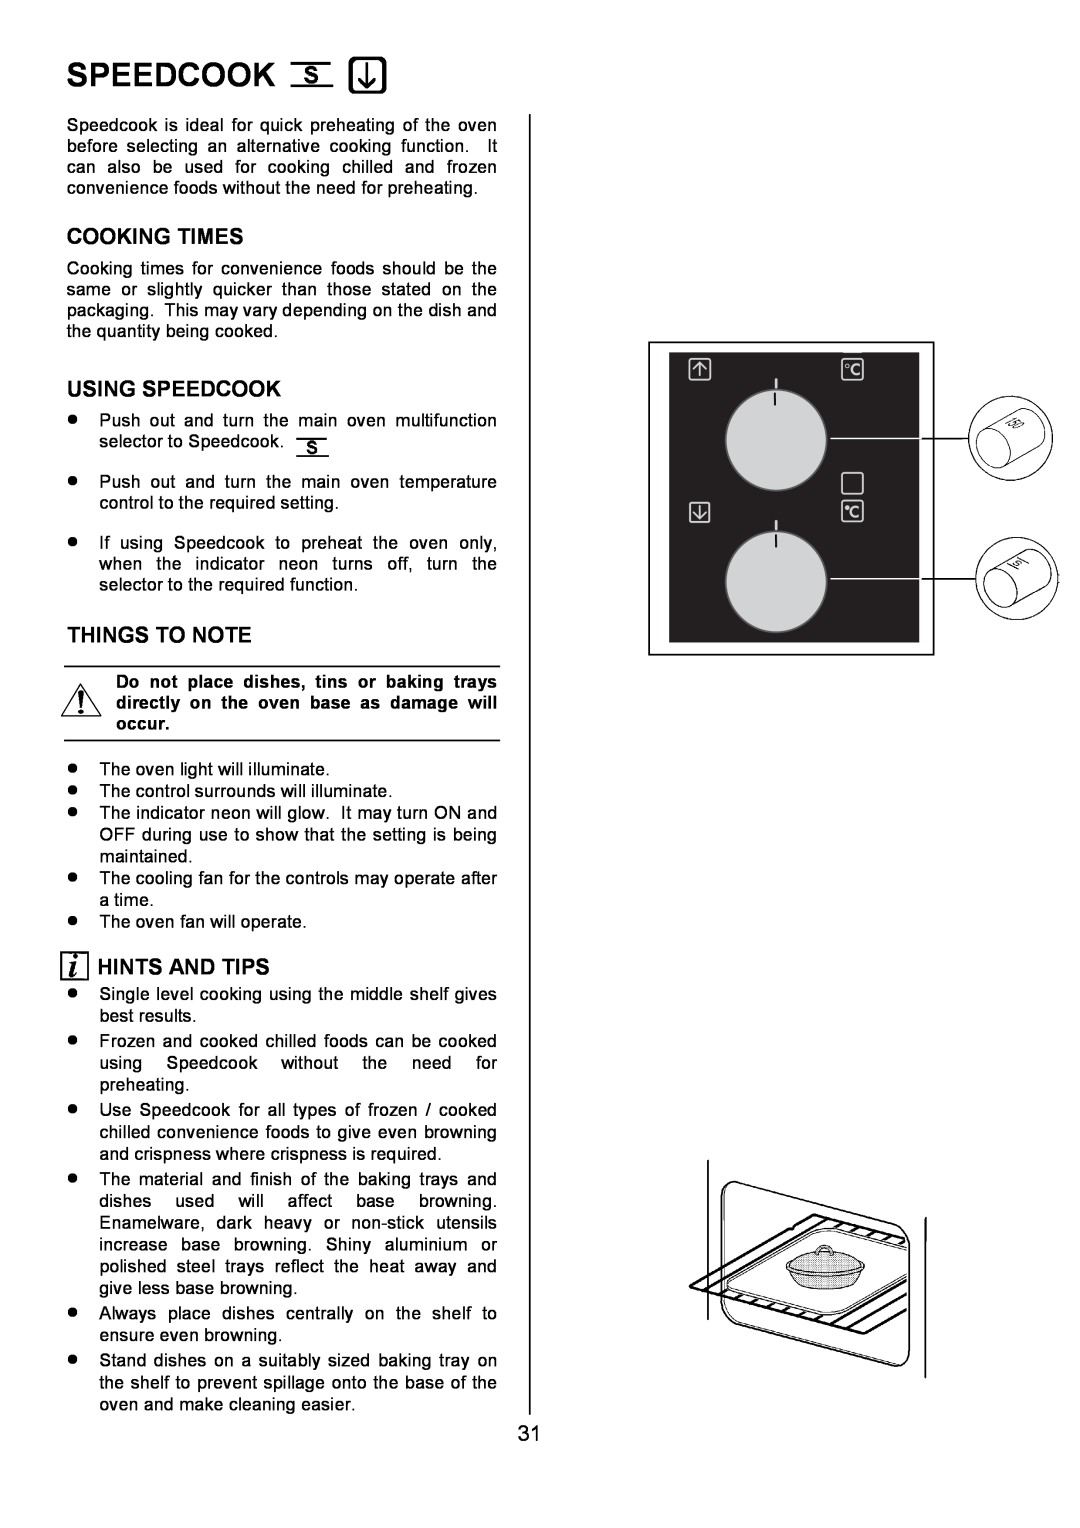 AEG 311704300, U7101-4 manual Using Speedcook, Cooking Times, Things To Note, Hints And Tips 